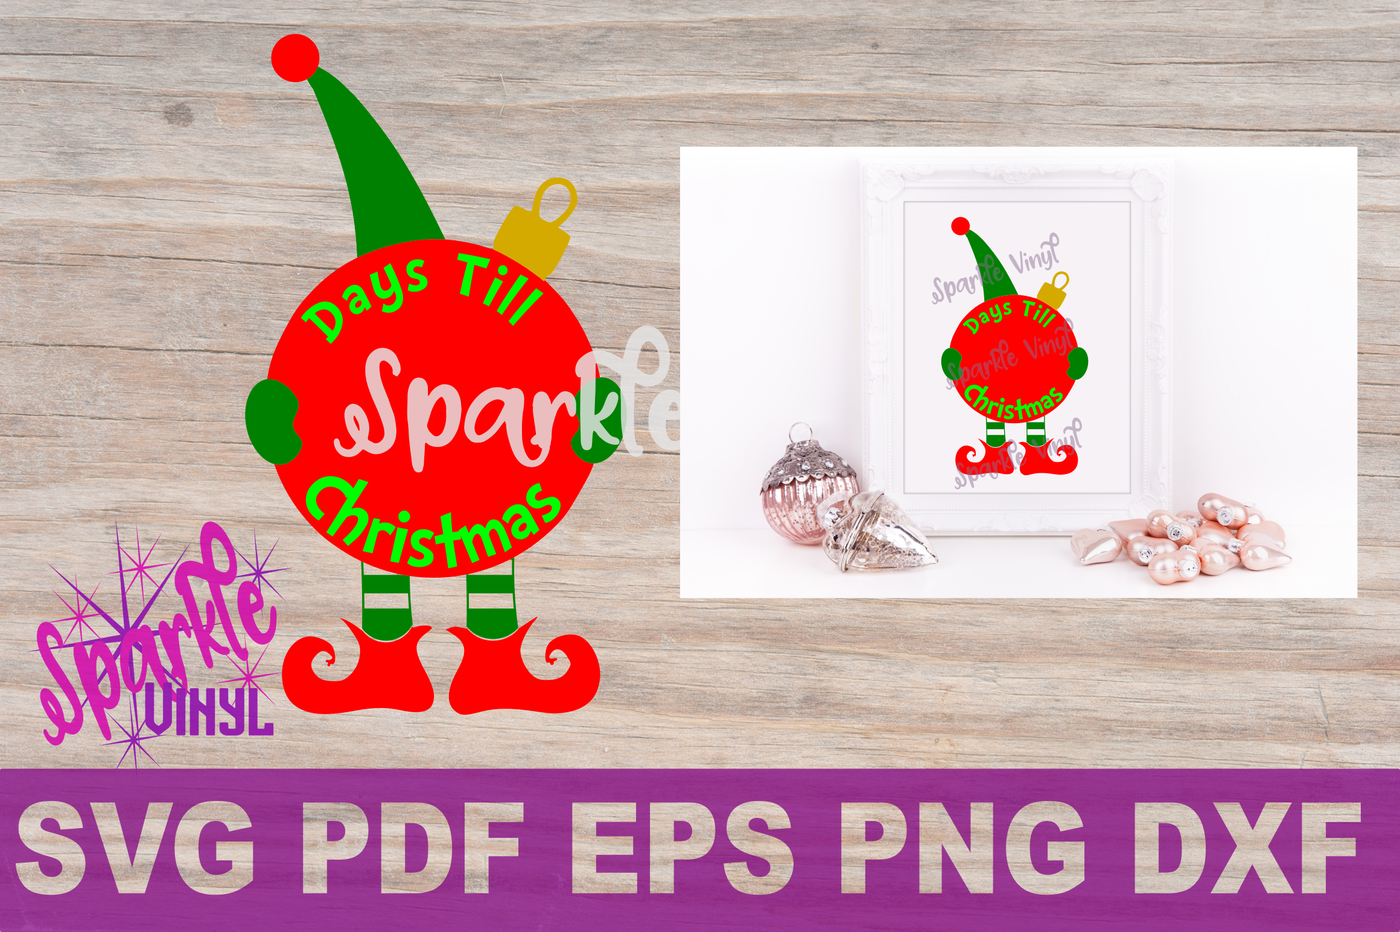 Download Svg Christmas Elf Countdown Sign Picture Printable Svg Cut File For Cricut Or Silhouette Dxf Eps Png Pdf Elf Clipart Diy Sign Stencil By Sparkle Vinyl Designs Thehungryjpeg Com